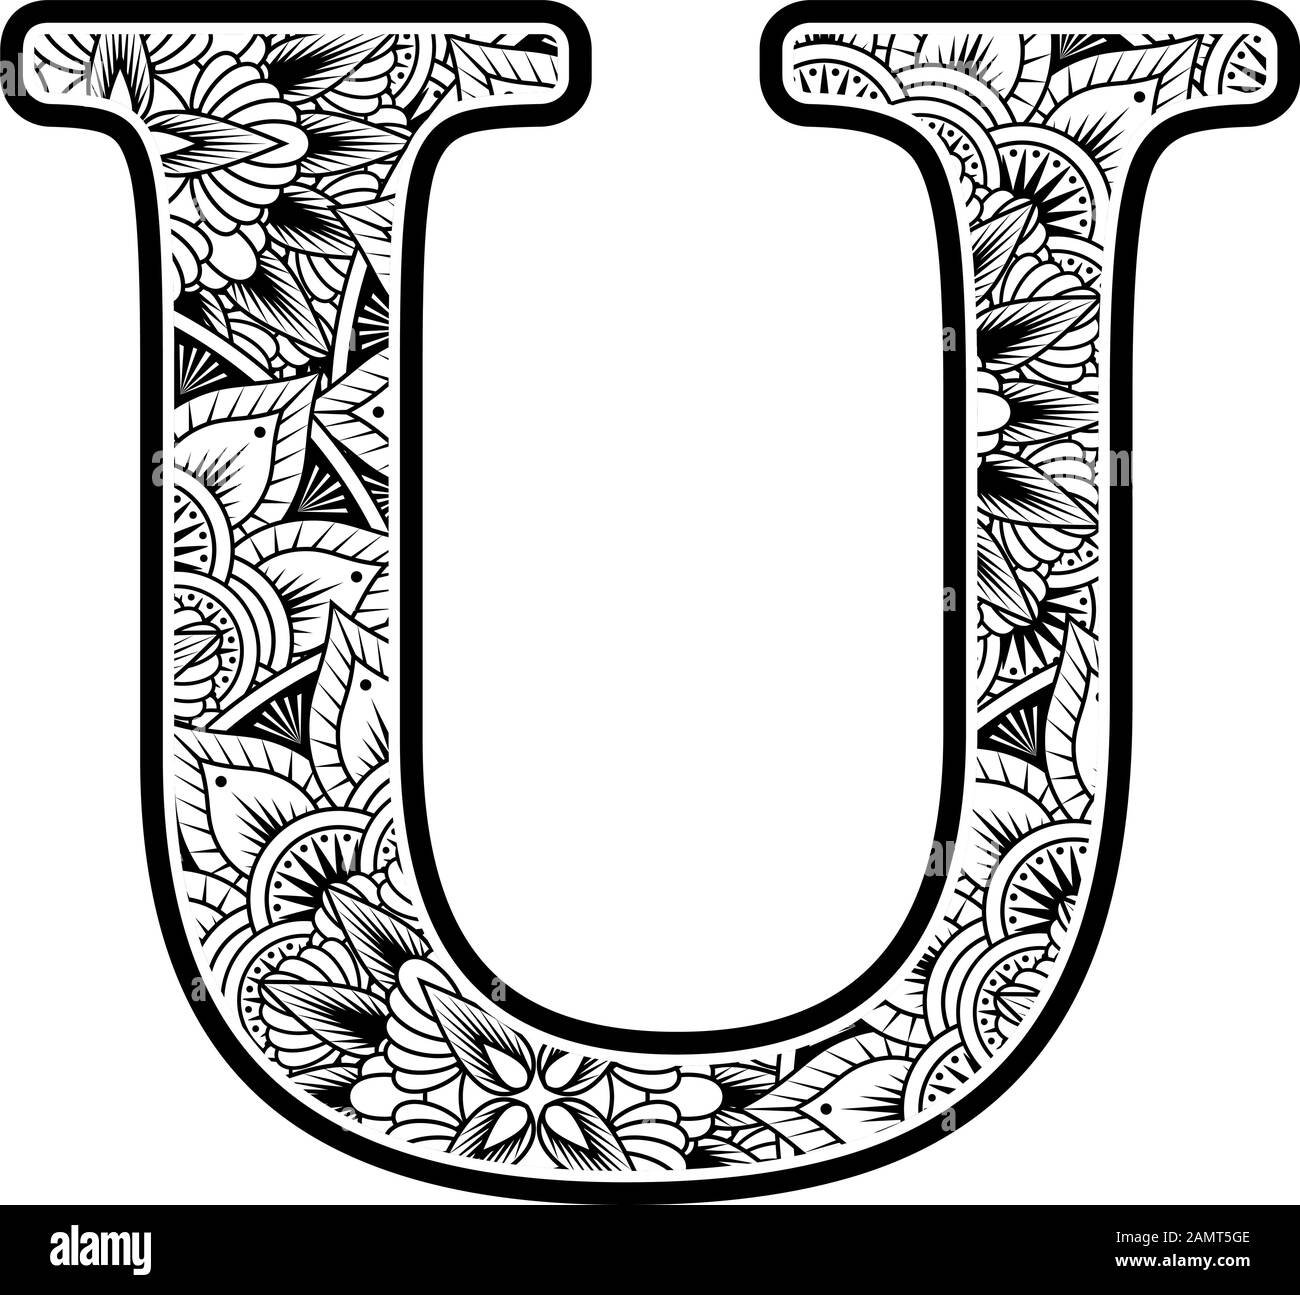 capital letter u with abstract flowers ornaments in black and white. design inspired from mandala art style for coloring. Isolated on white background Stock Vector